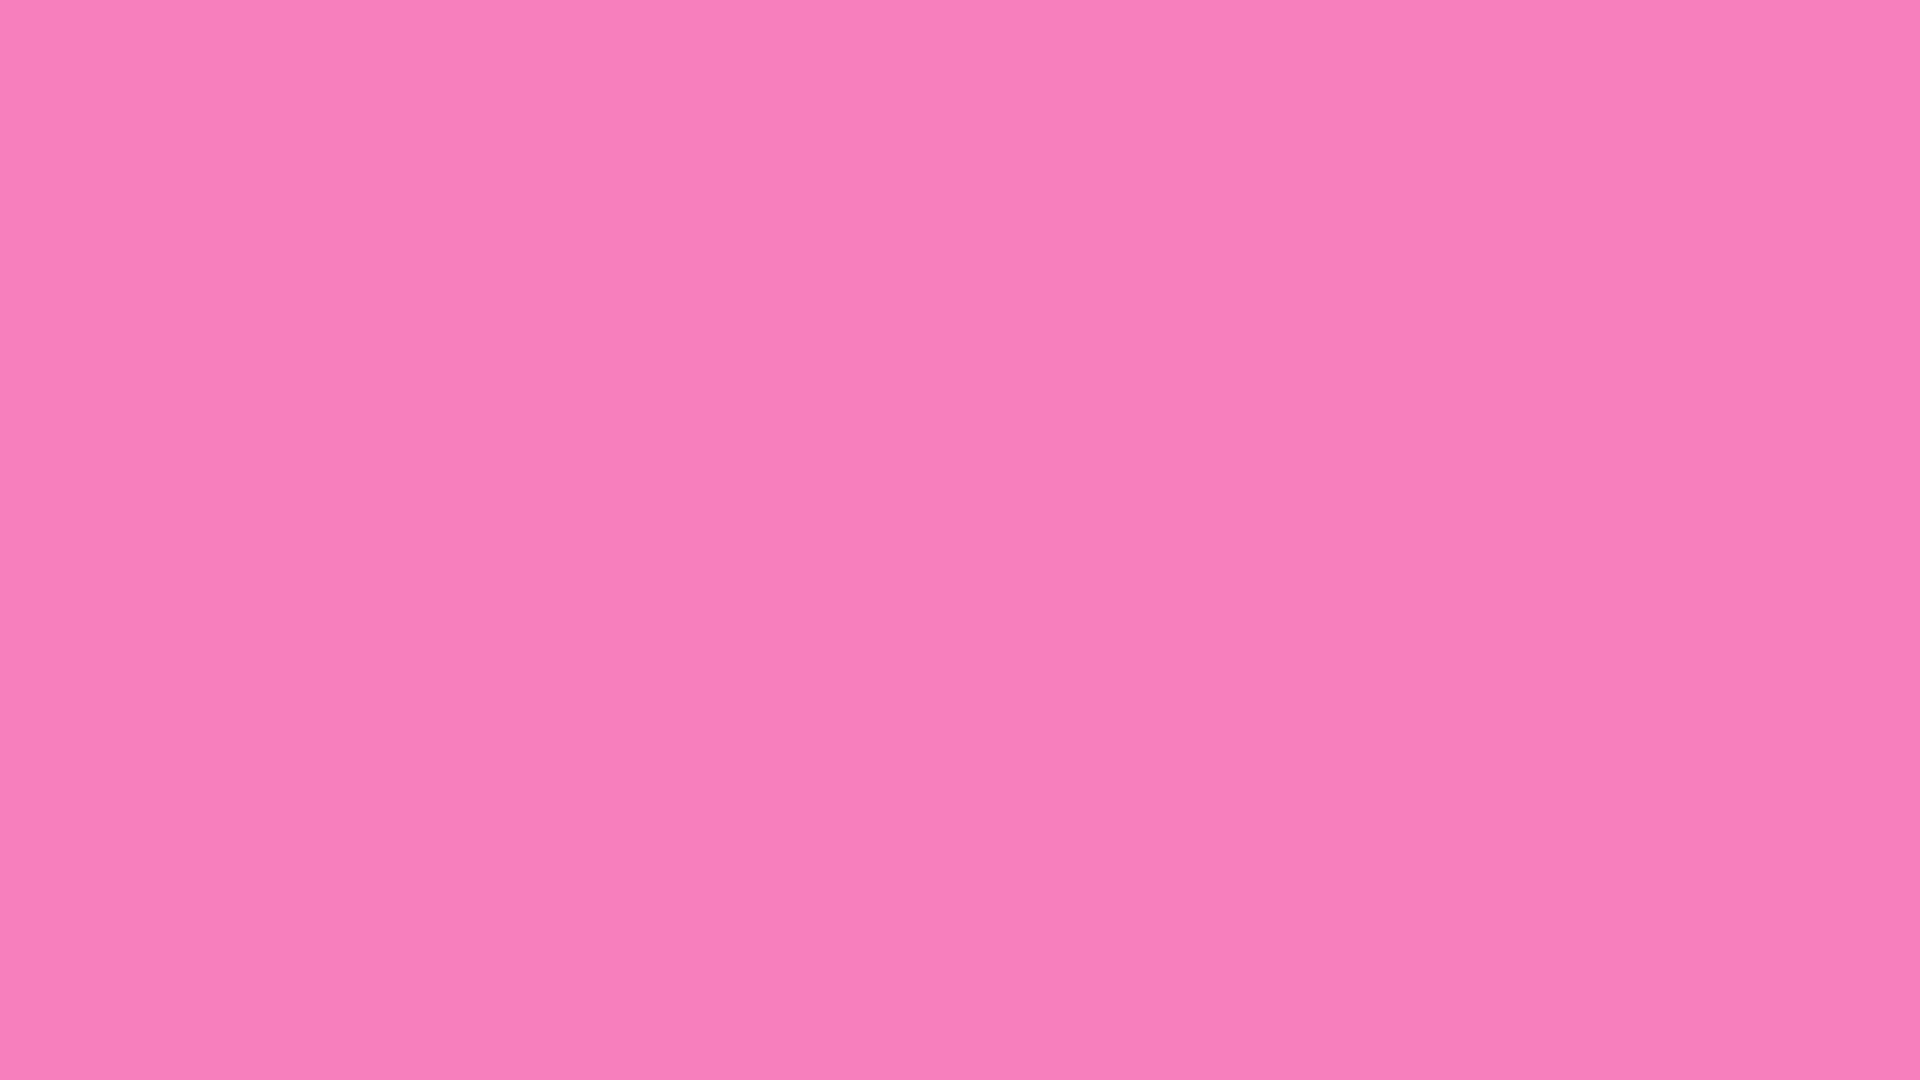 1920x1080 Persian Pink Solid Color Background